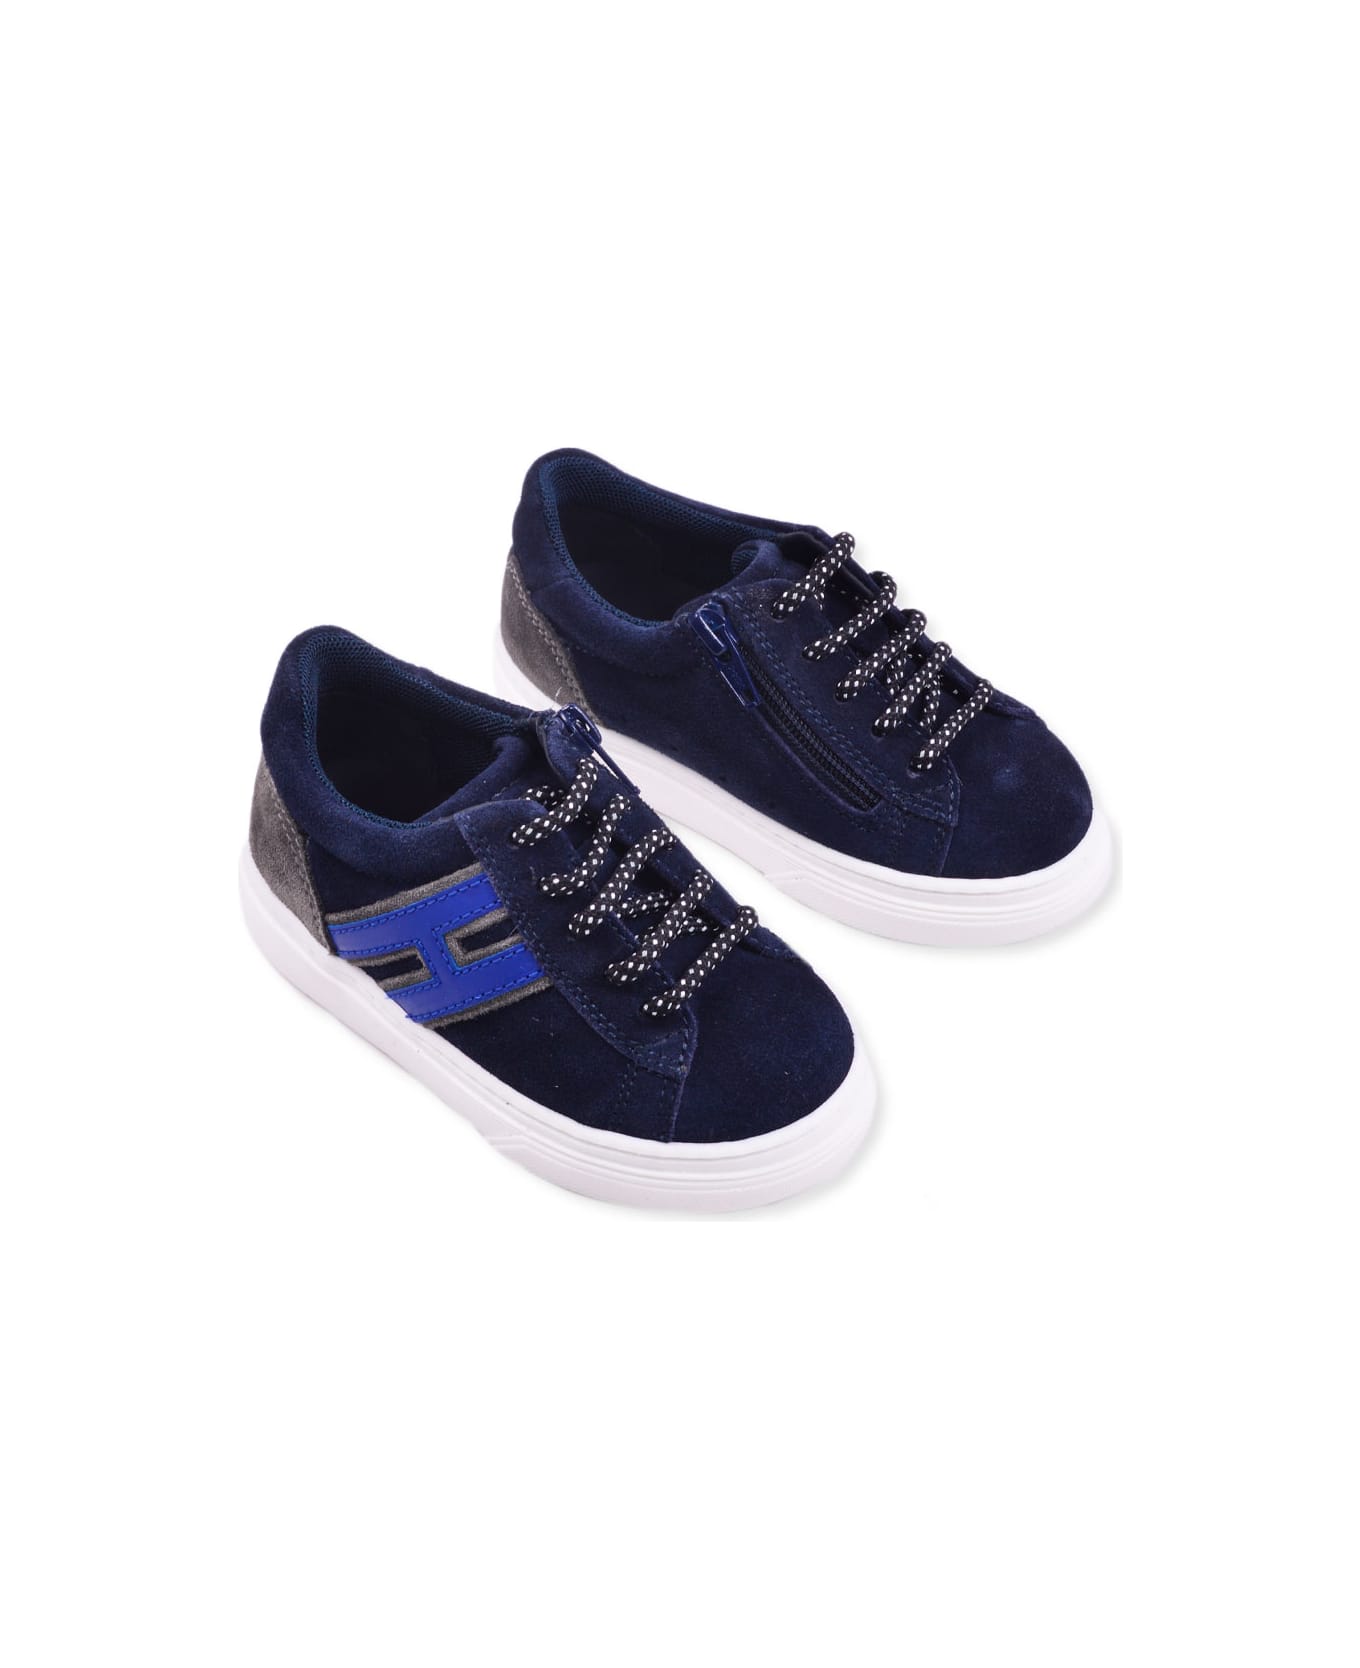 Hogan Sneakers In Suede Leather - Blue